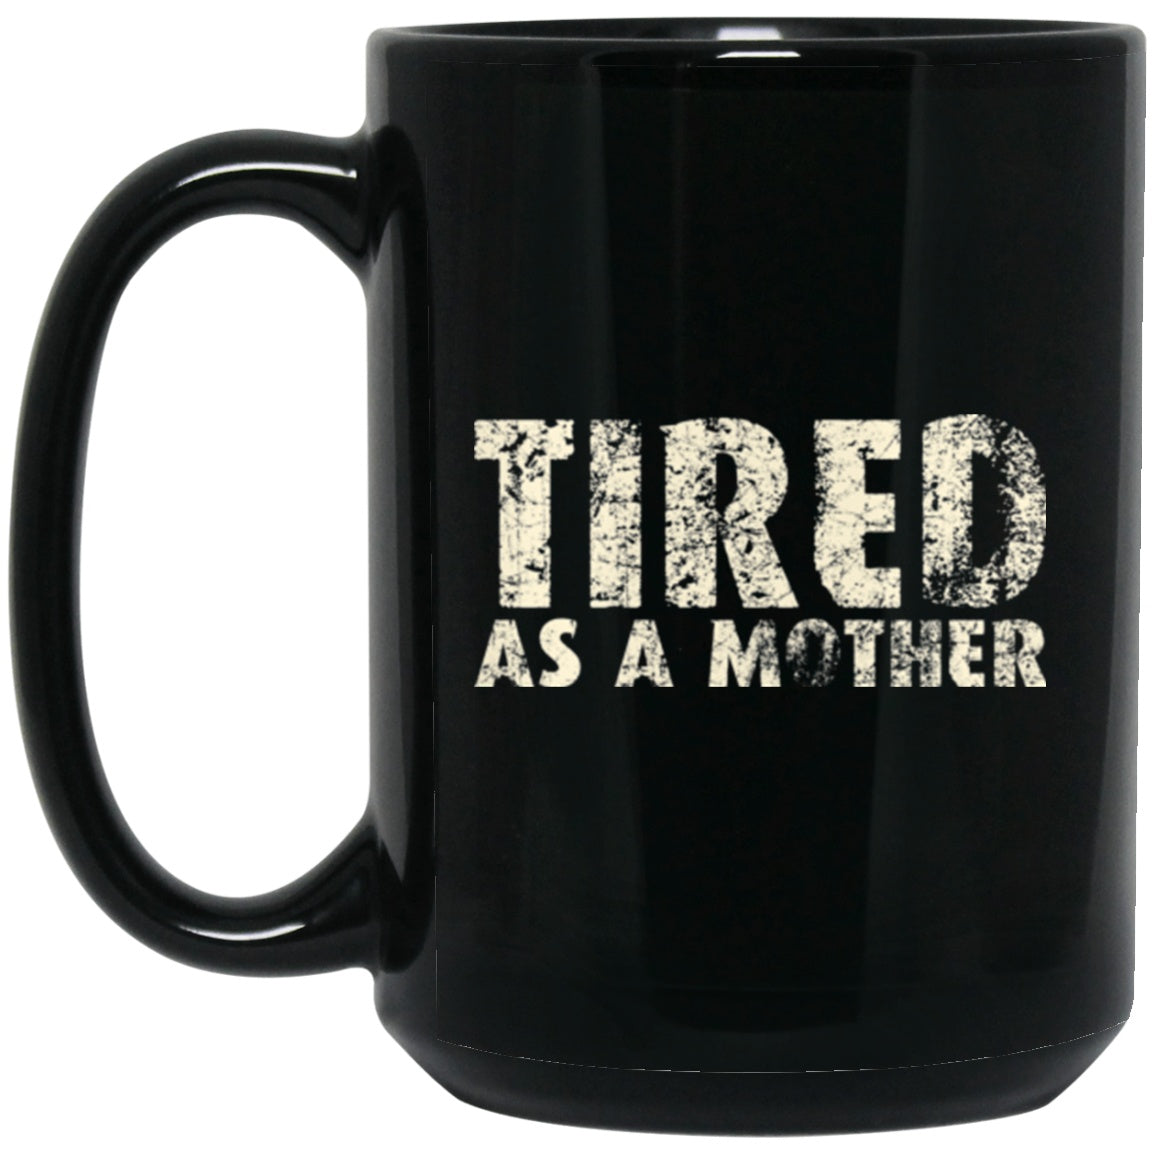 Mom Mug Tired As A Mother funny Black Coffee Mugs - GoneBold.gift